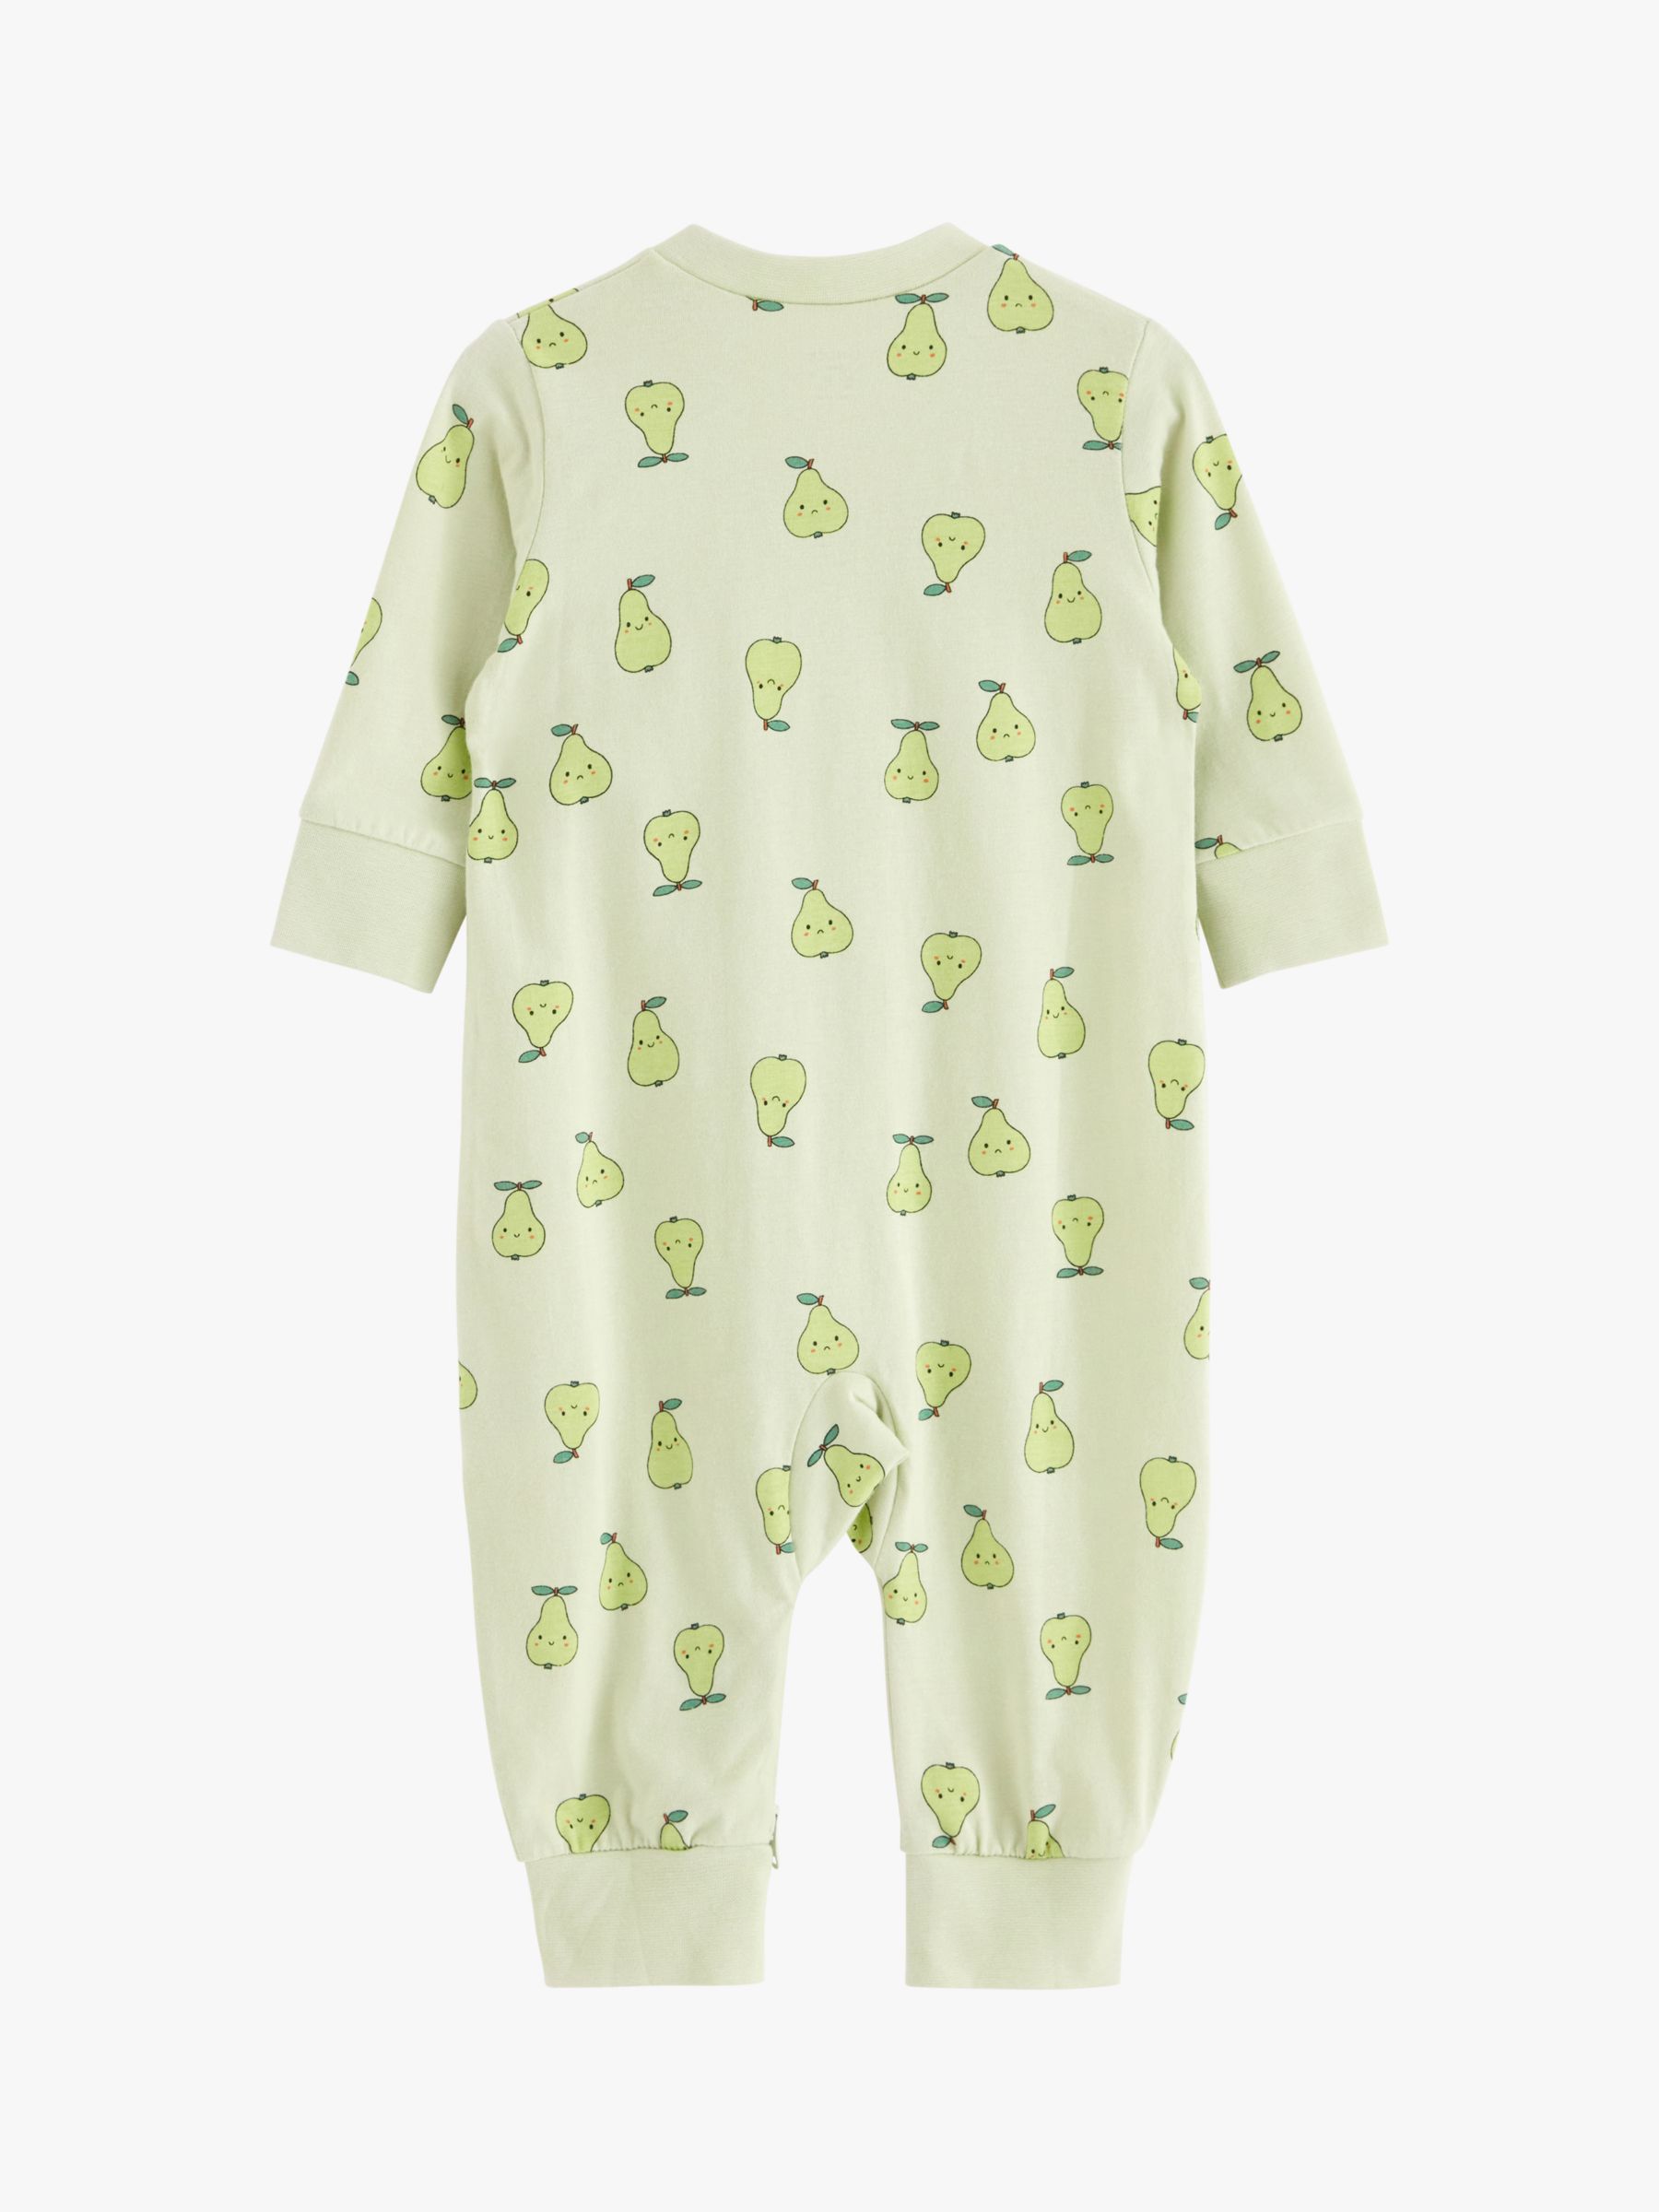 Lindex Baby Organic Cotton Pear Print All-in-One Pyjamas, Light Dusty Green, 7-9 months